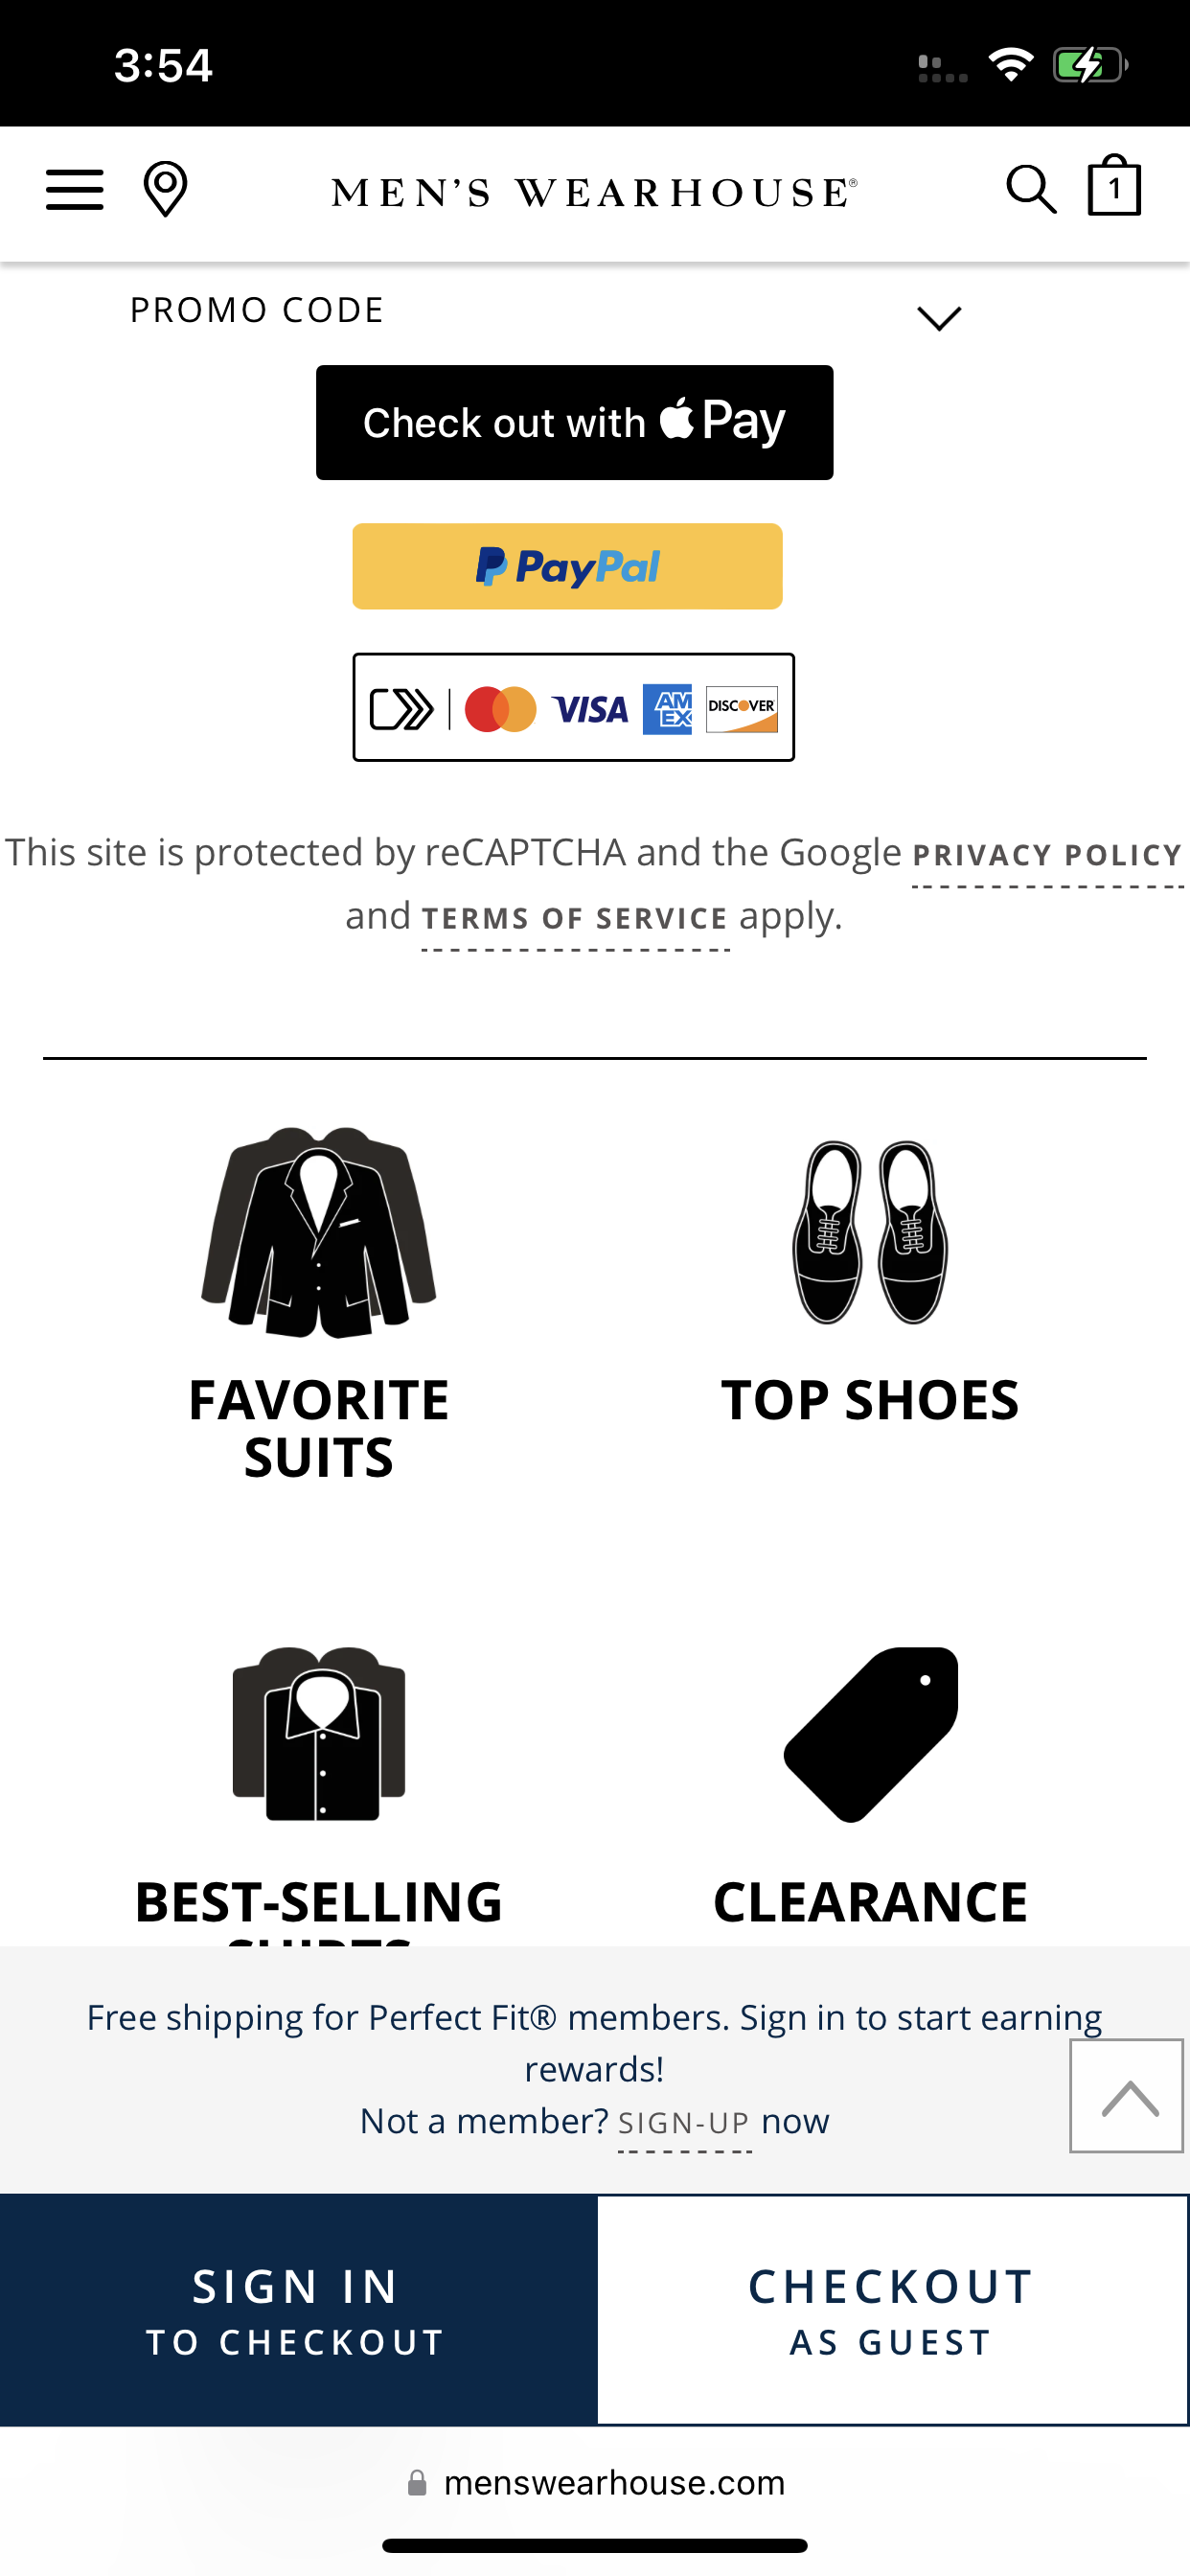 Men's Wearhouse accepts Apple Pay on its website.